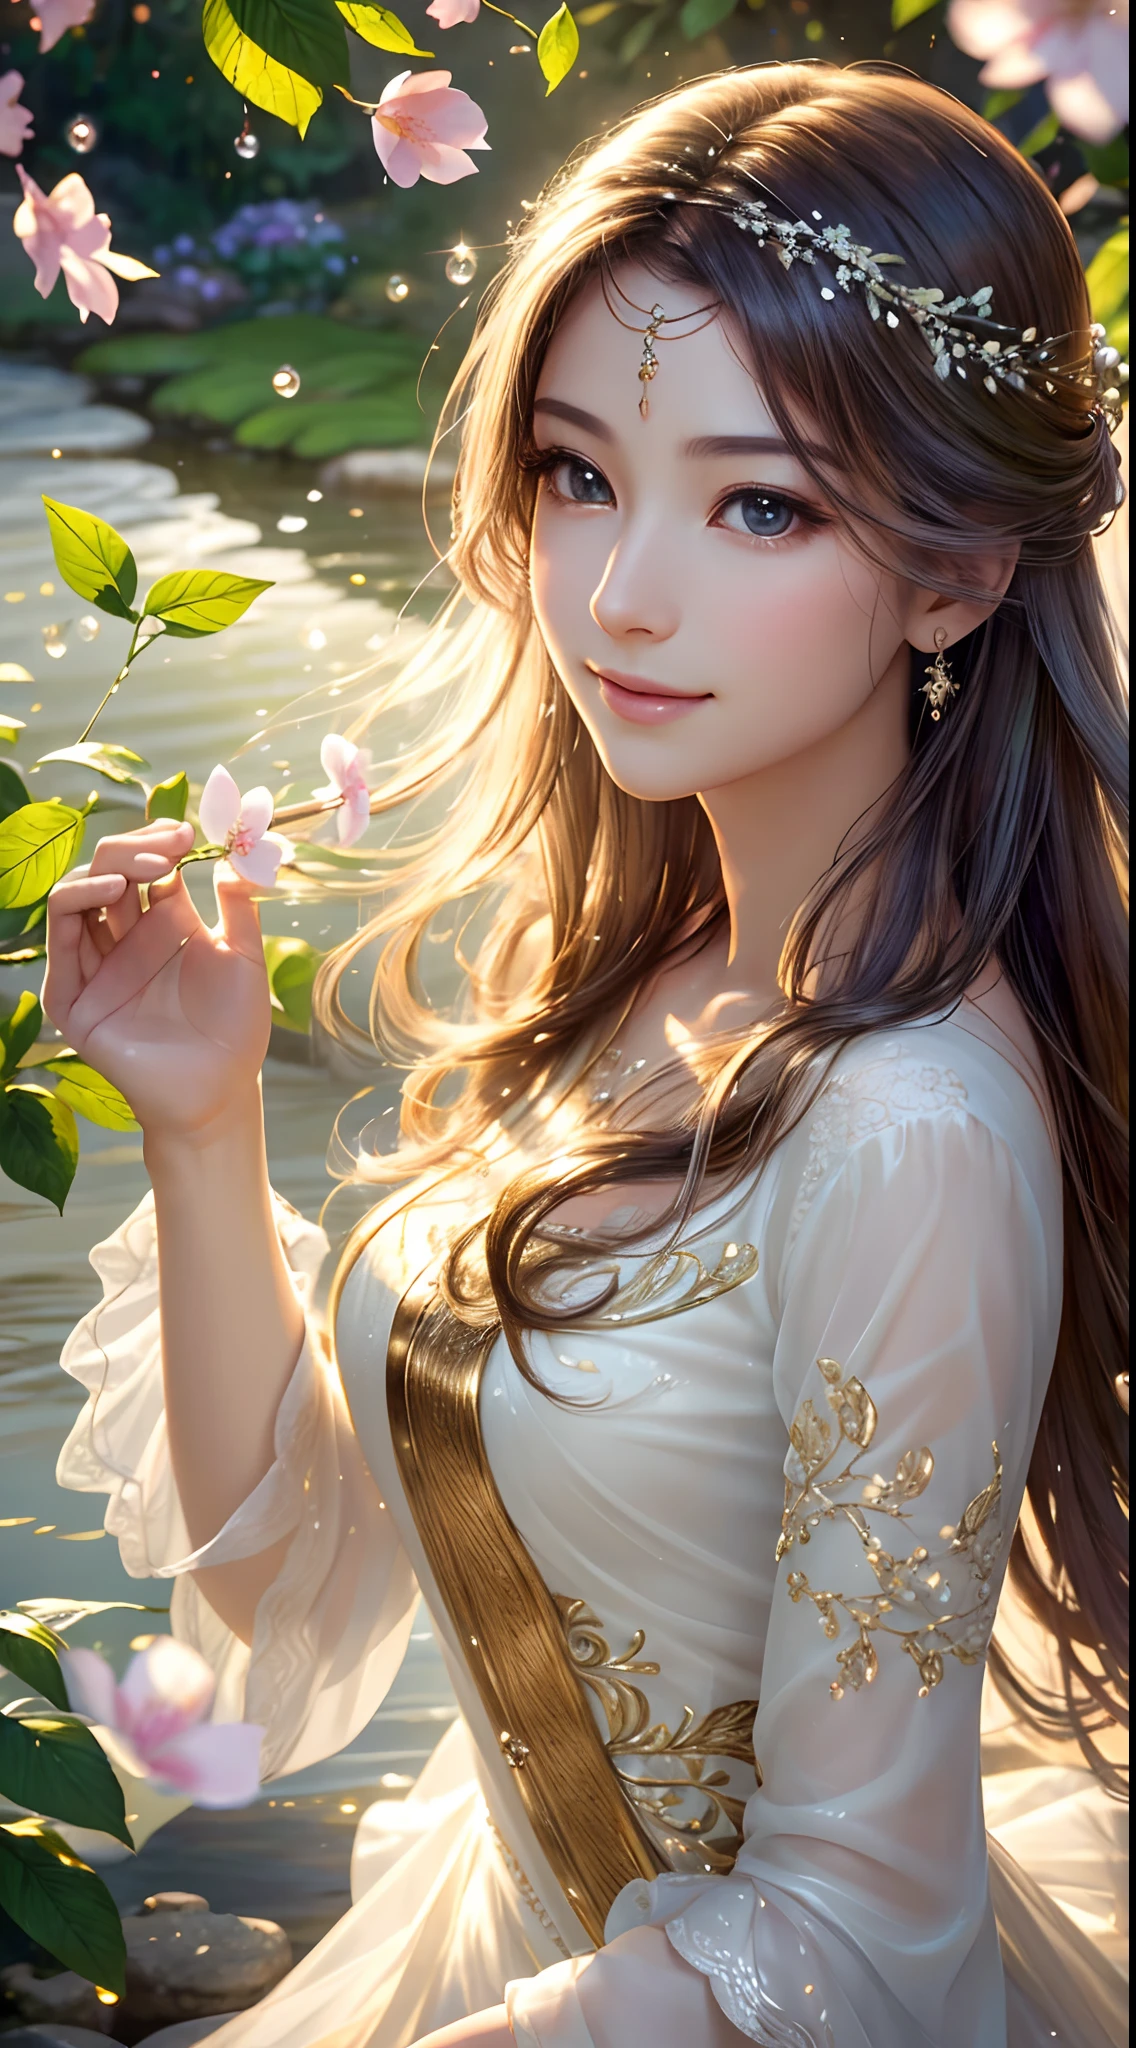 (Best quality,4K,A high resolution,Ultra-detailed,Realistic:1.37),Vivid colors,Sunlight,llight rays,bergamot,white blossoms,Beautiful girl,Exquisite features,Flowing hair,Serene expression,Garden setting,Elaborate dress,Soft sunlight,Gentle breeze,Cheerful ambiance,Backlit scene,a hint of smile,ethereal glowing,Fresh in the morning,Long shadows,harmony of nature,subtle reflections,Natural beauty,Twinkling dewdrops,Clear detail,serenity and calm,Sublime ingredients,Arrive at the branch,whispering leaves,Aromatherapy petals,with light glowing,Sparkling highlights,Subtle shadows,Soft focus,Sublime beauty,Whisper natural,Fantastical Atmosphere,Illuminated background.